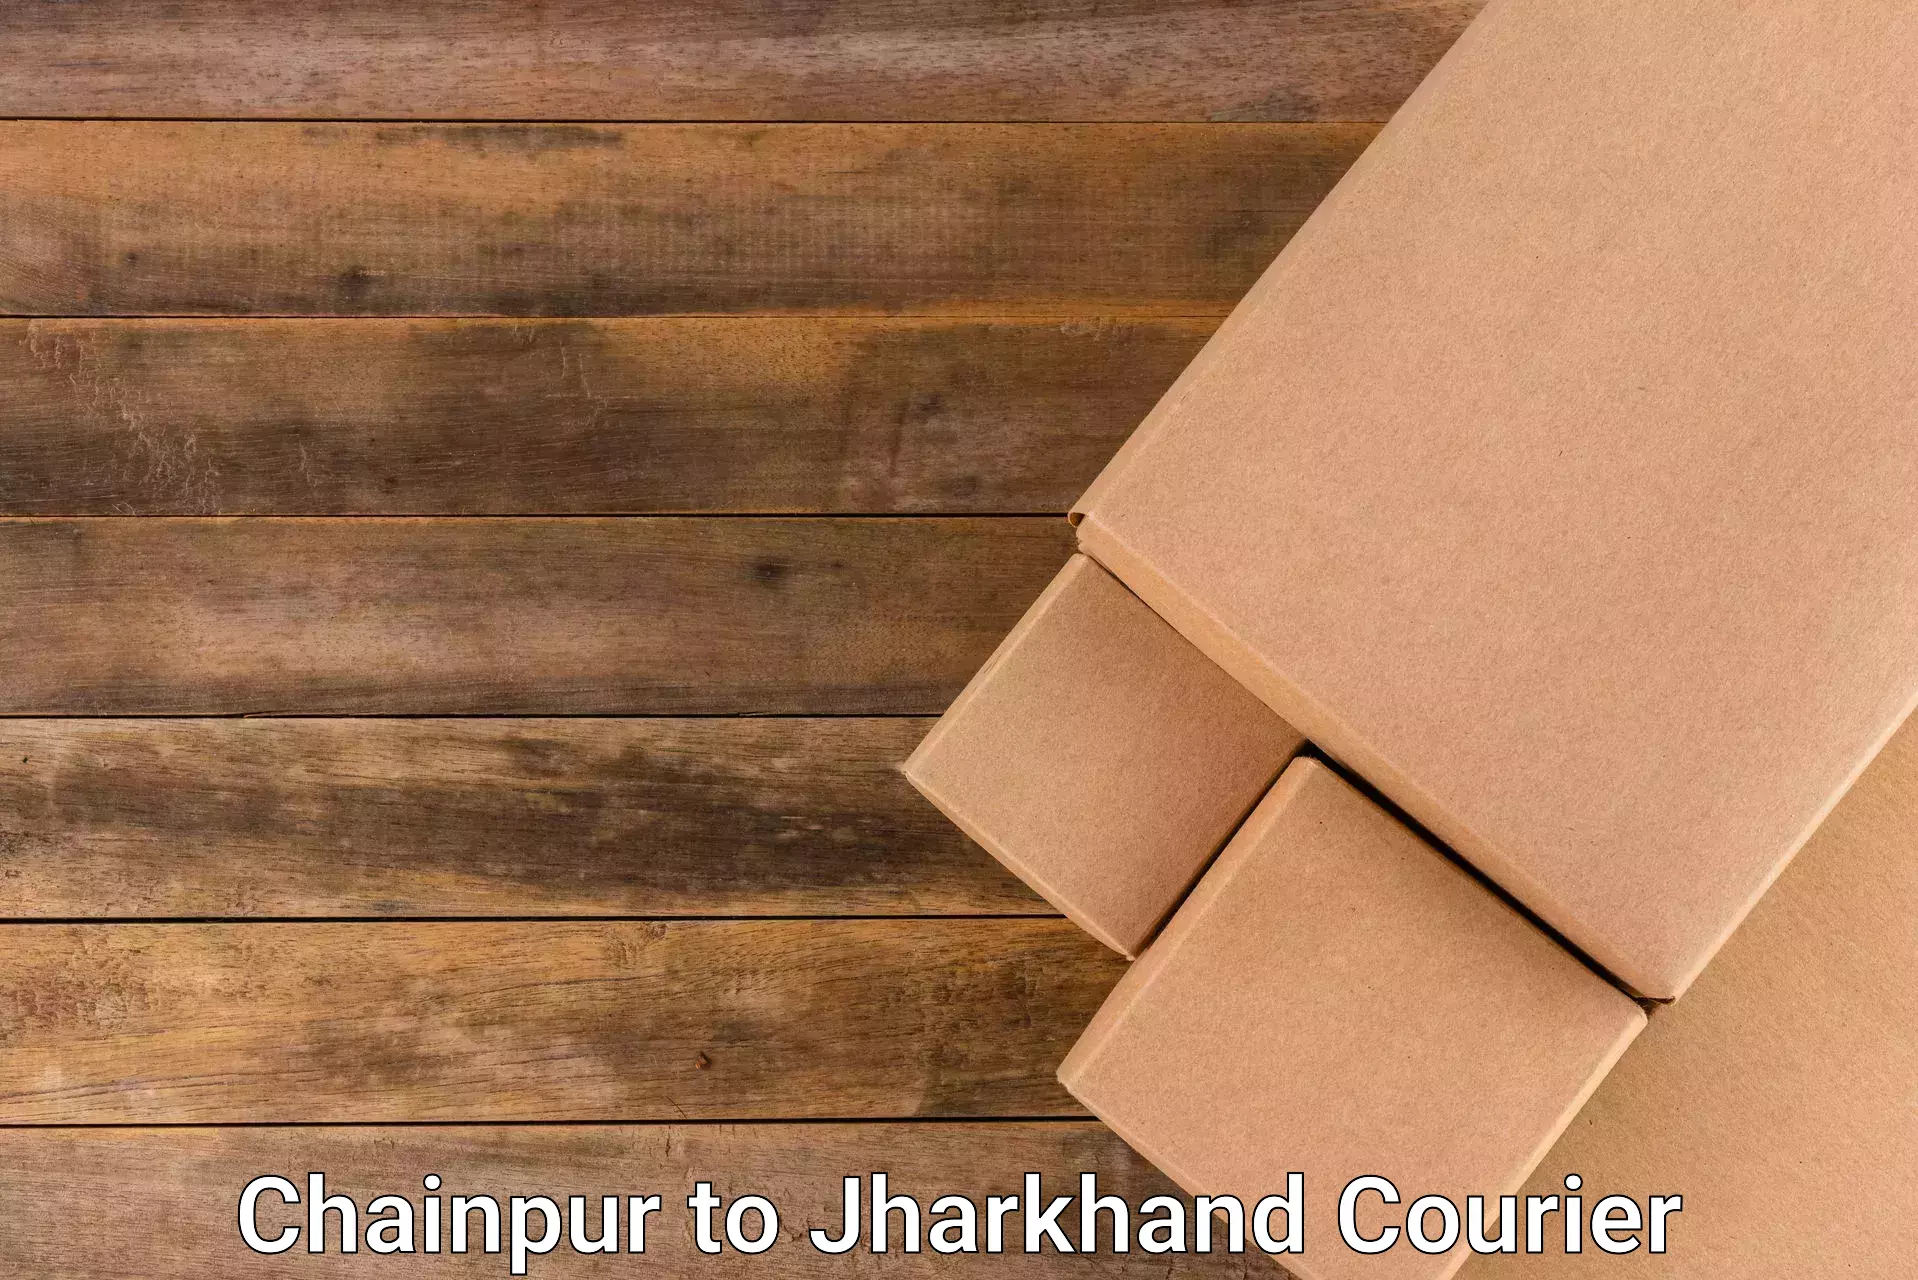 High-capacity parcel service Chainpur to Jamshedpur